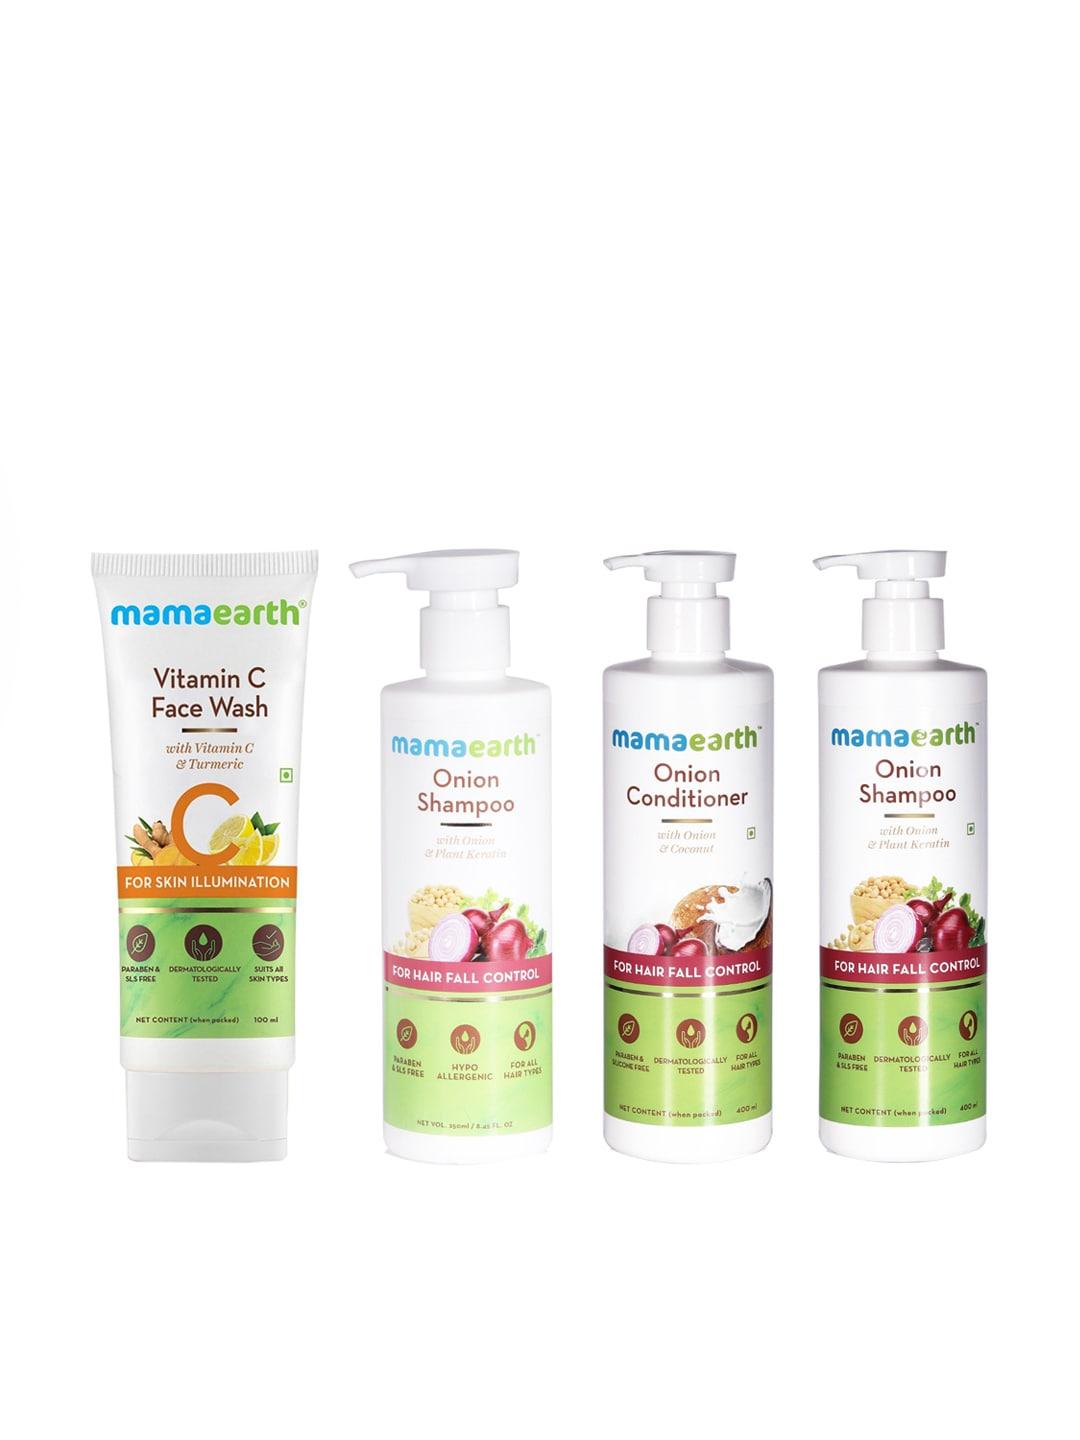 Mamaearth Unisex Set of 2 Shampoos, Hair Conditioner & Vitamin C Face Wash